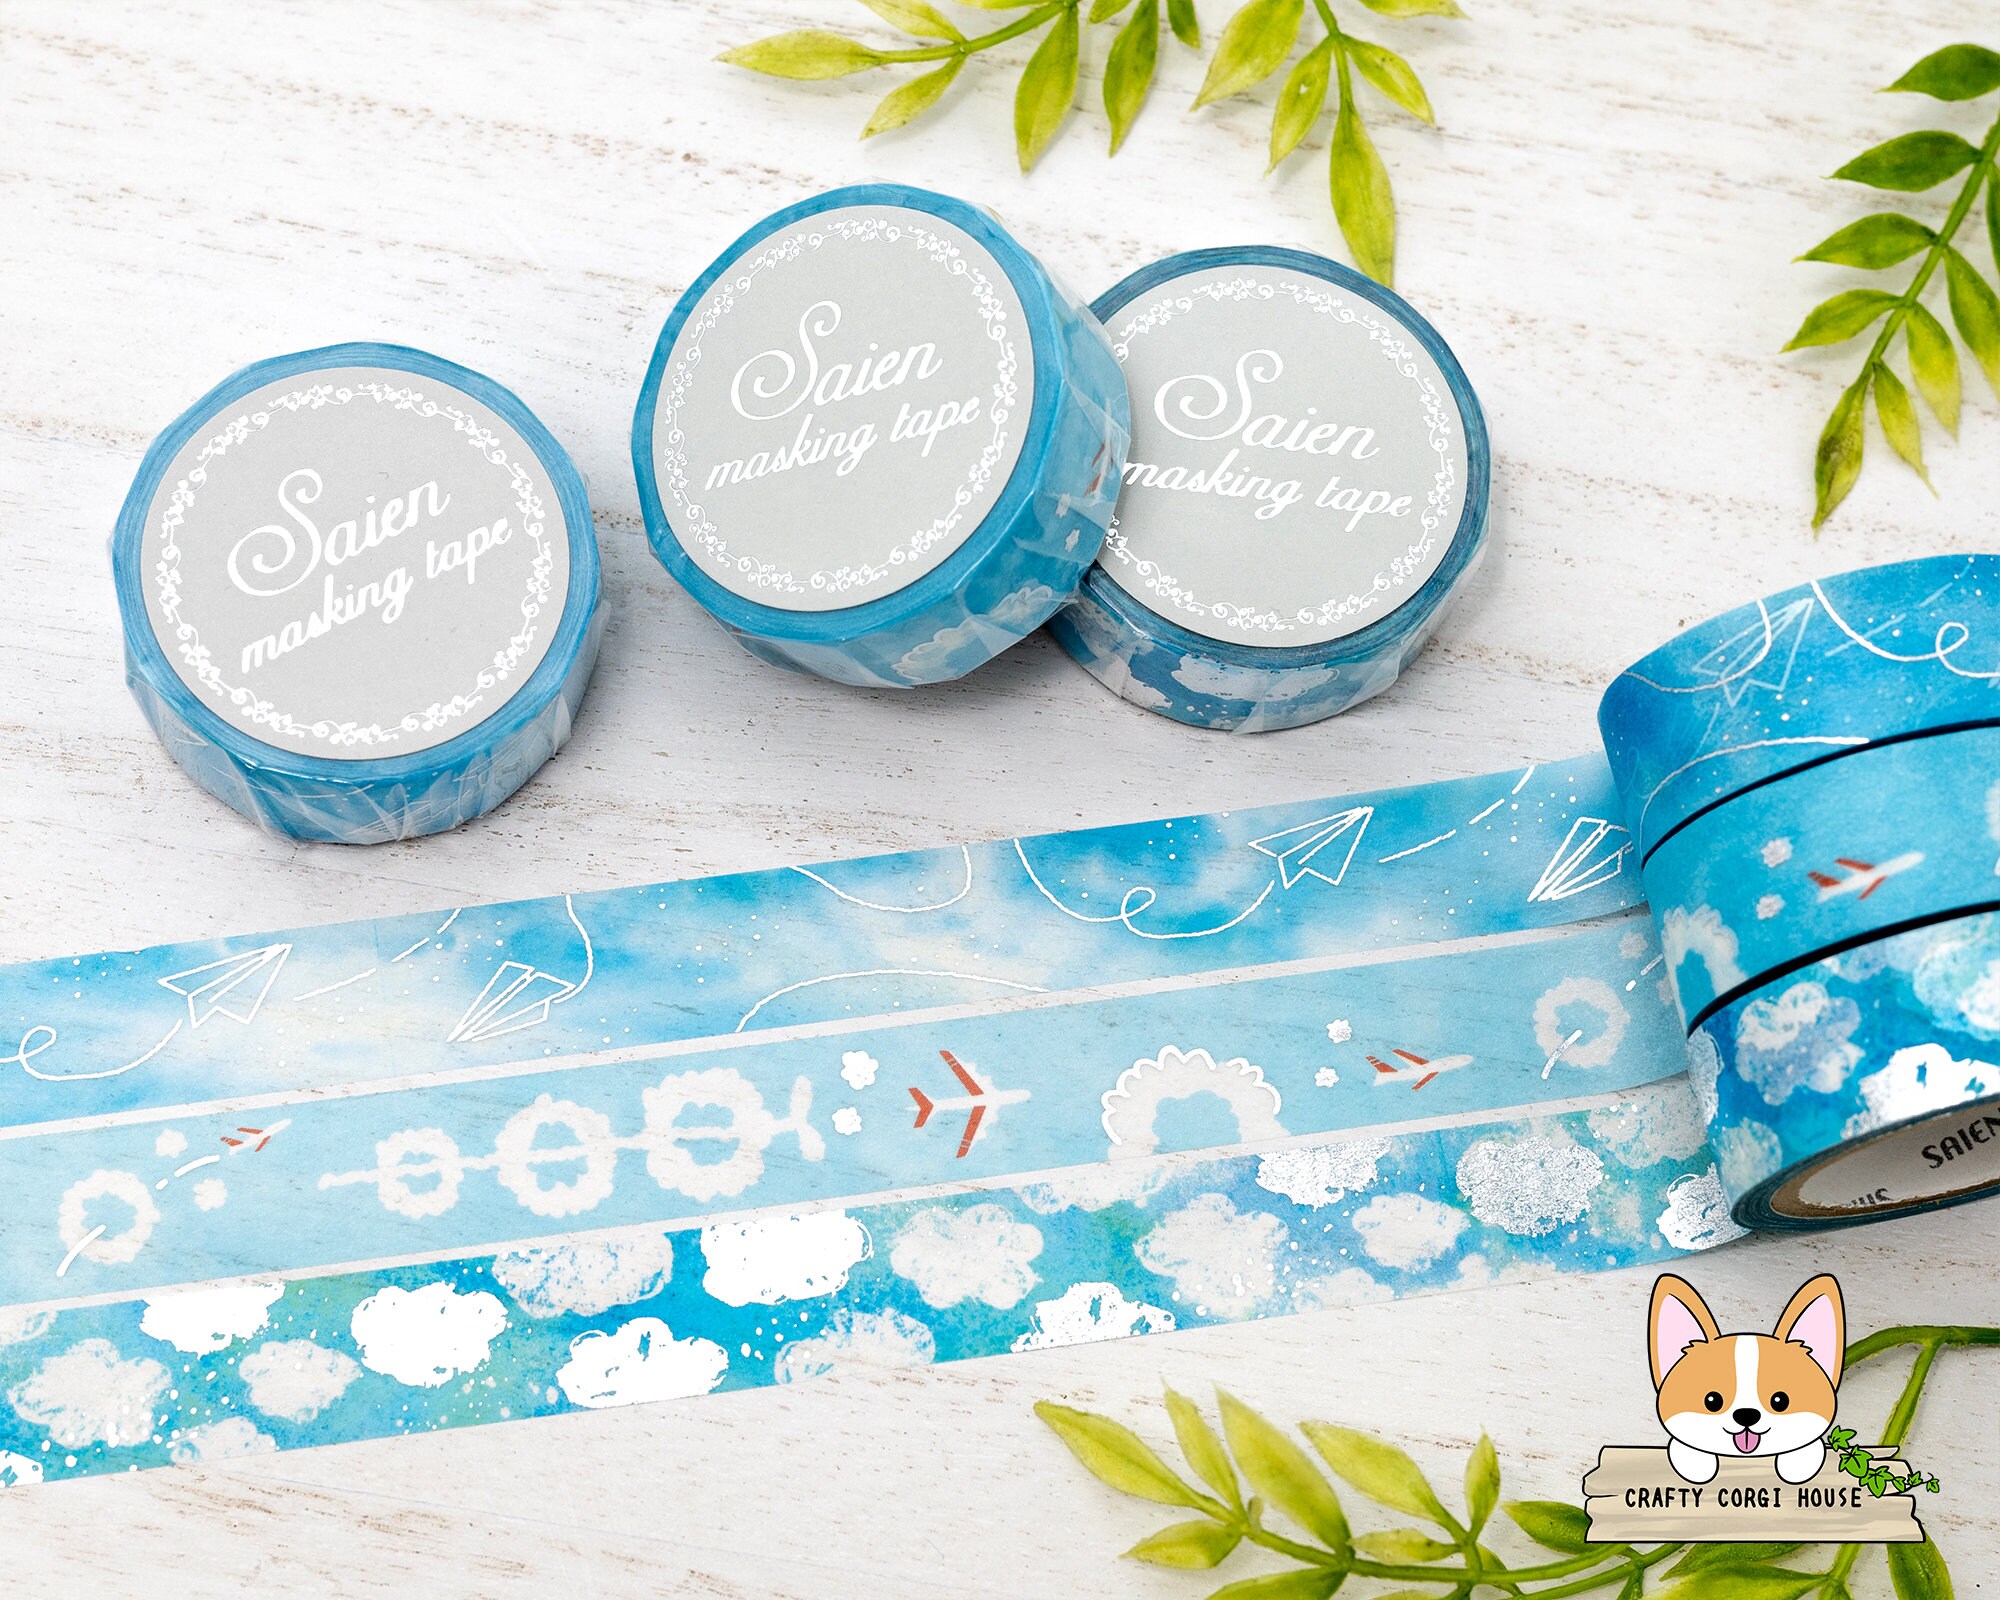 Sea Life Washi Tape, Ocean Washi Tape for Journaling, Crafting, Planner  Silver Foiled, 15mm X 4m 